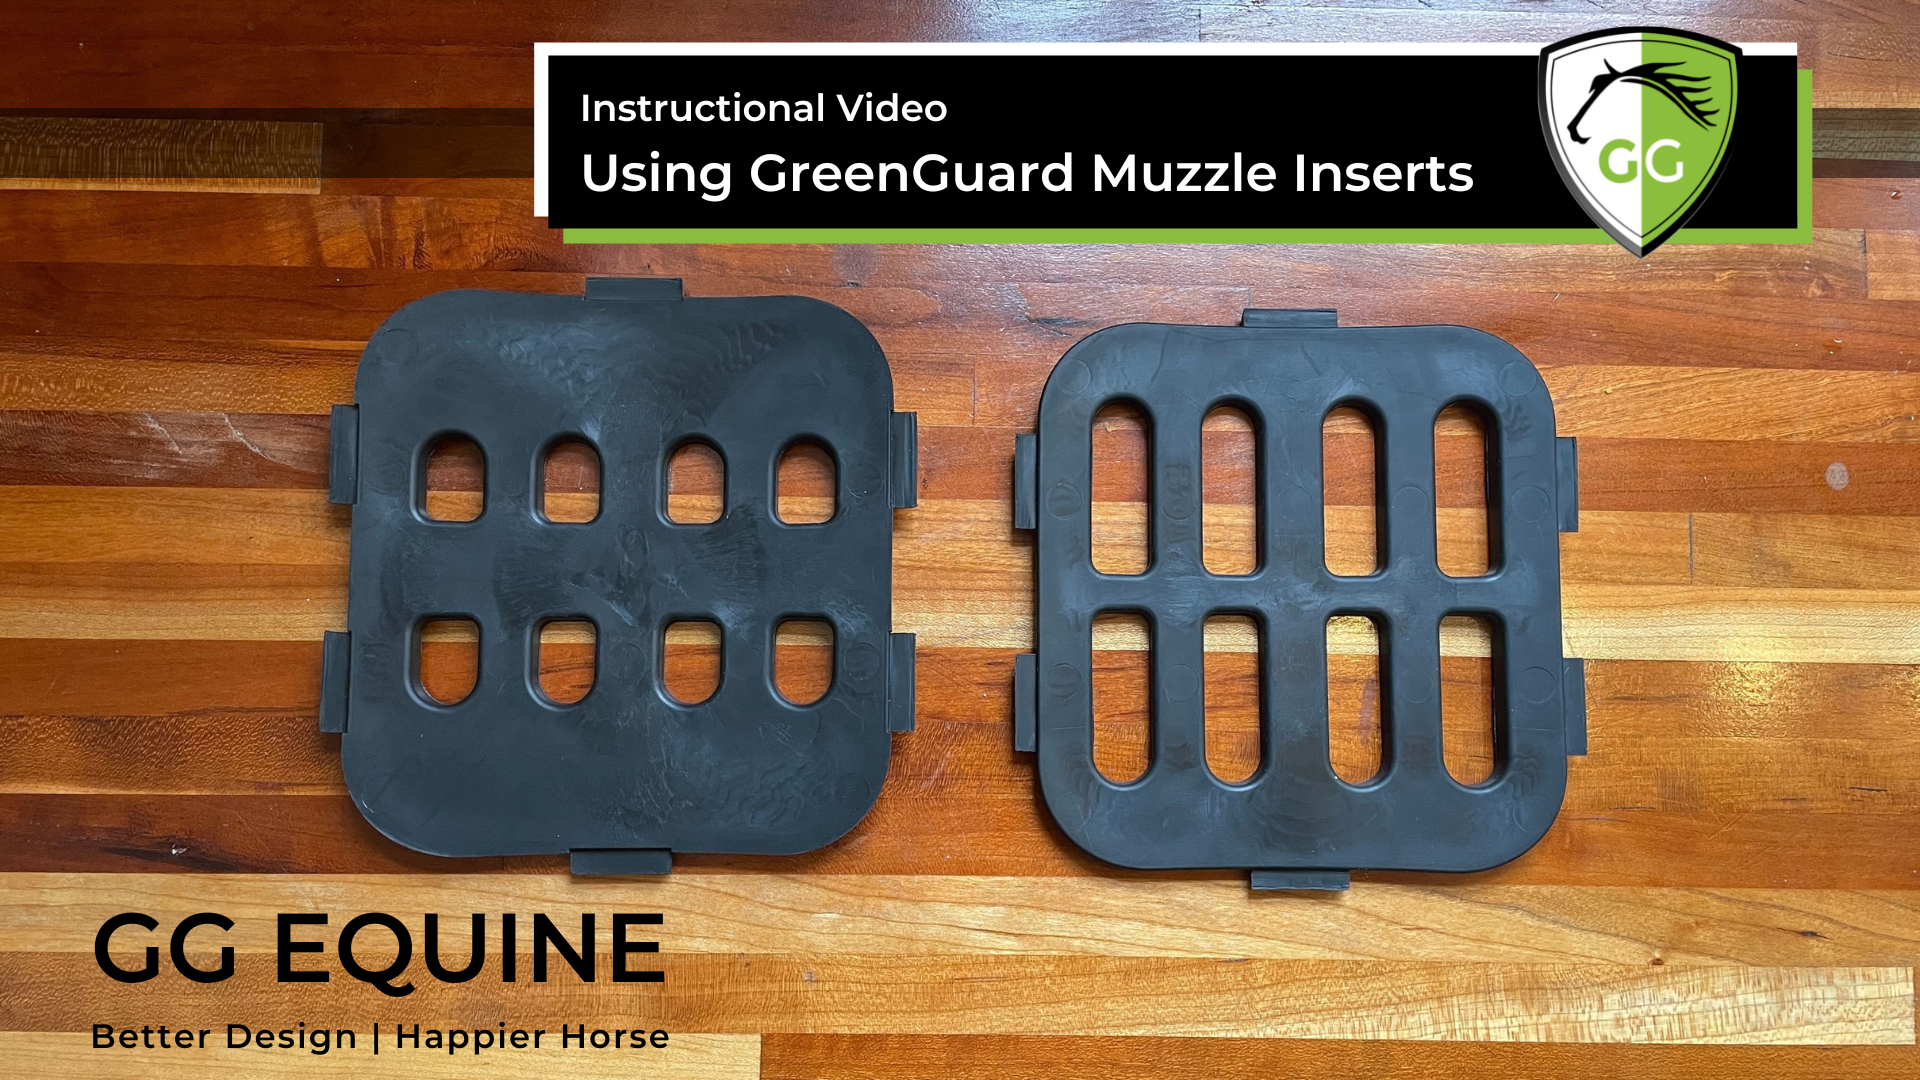 Load video: The primary video tutorial for preparing and using the &quot;diet&quot; rubber GreenGuard muzzle insert.